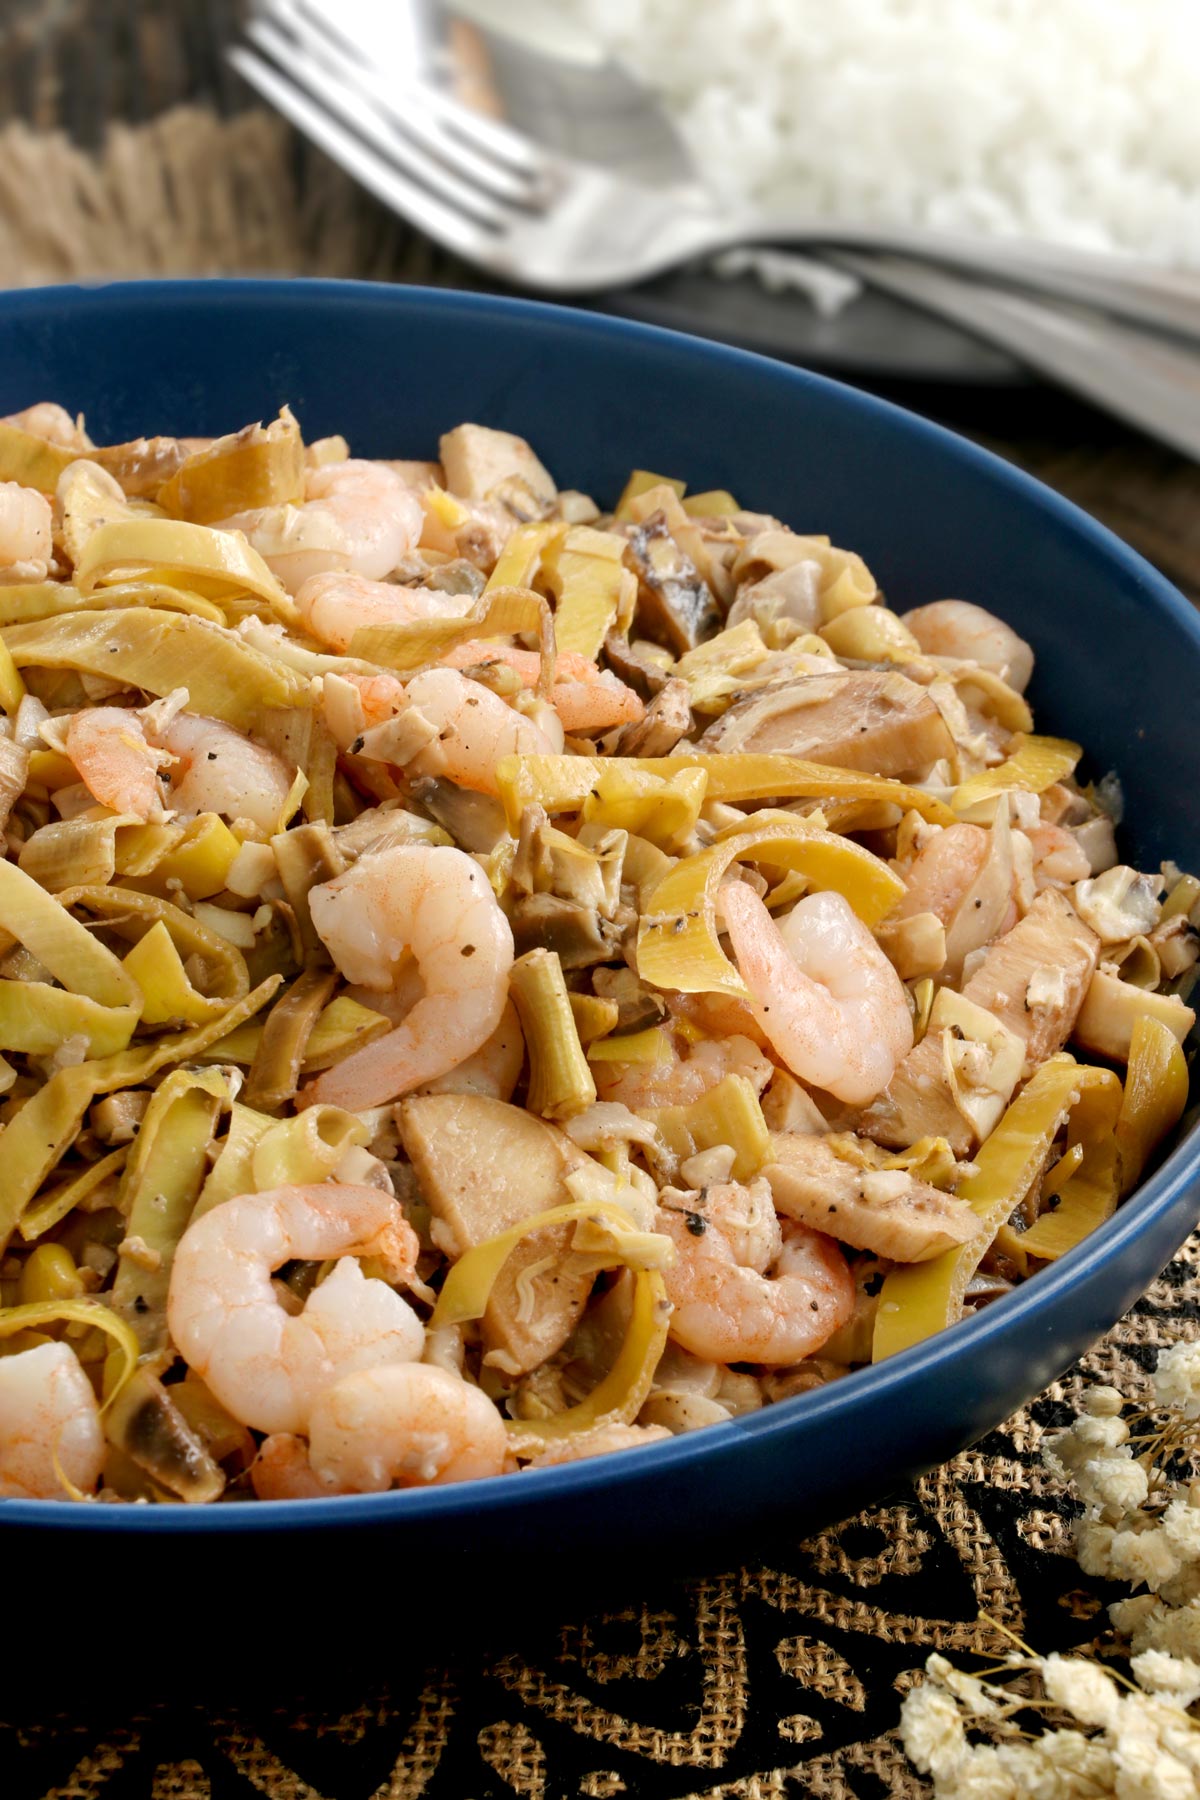 Kilawing Puso ng Saging with Shrimp is a hearty and healthy dish that the whole family will enjoy.